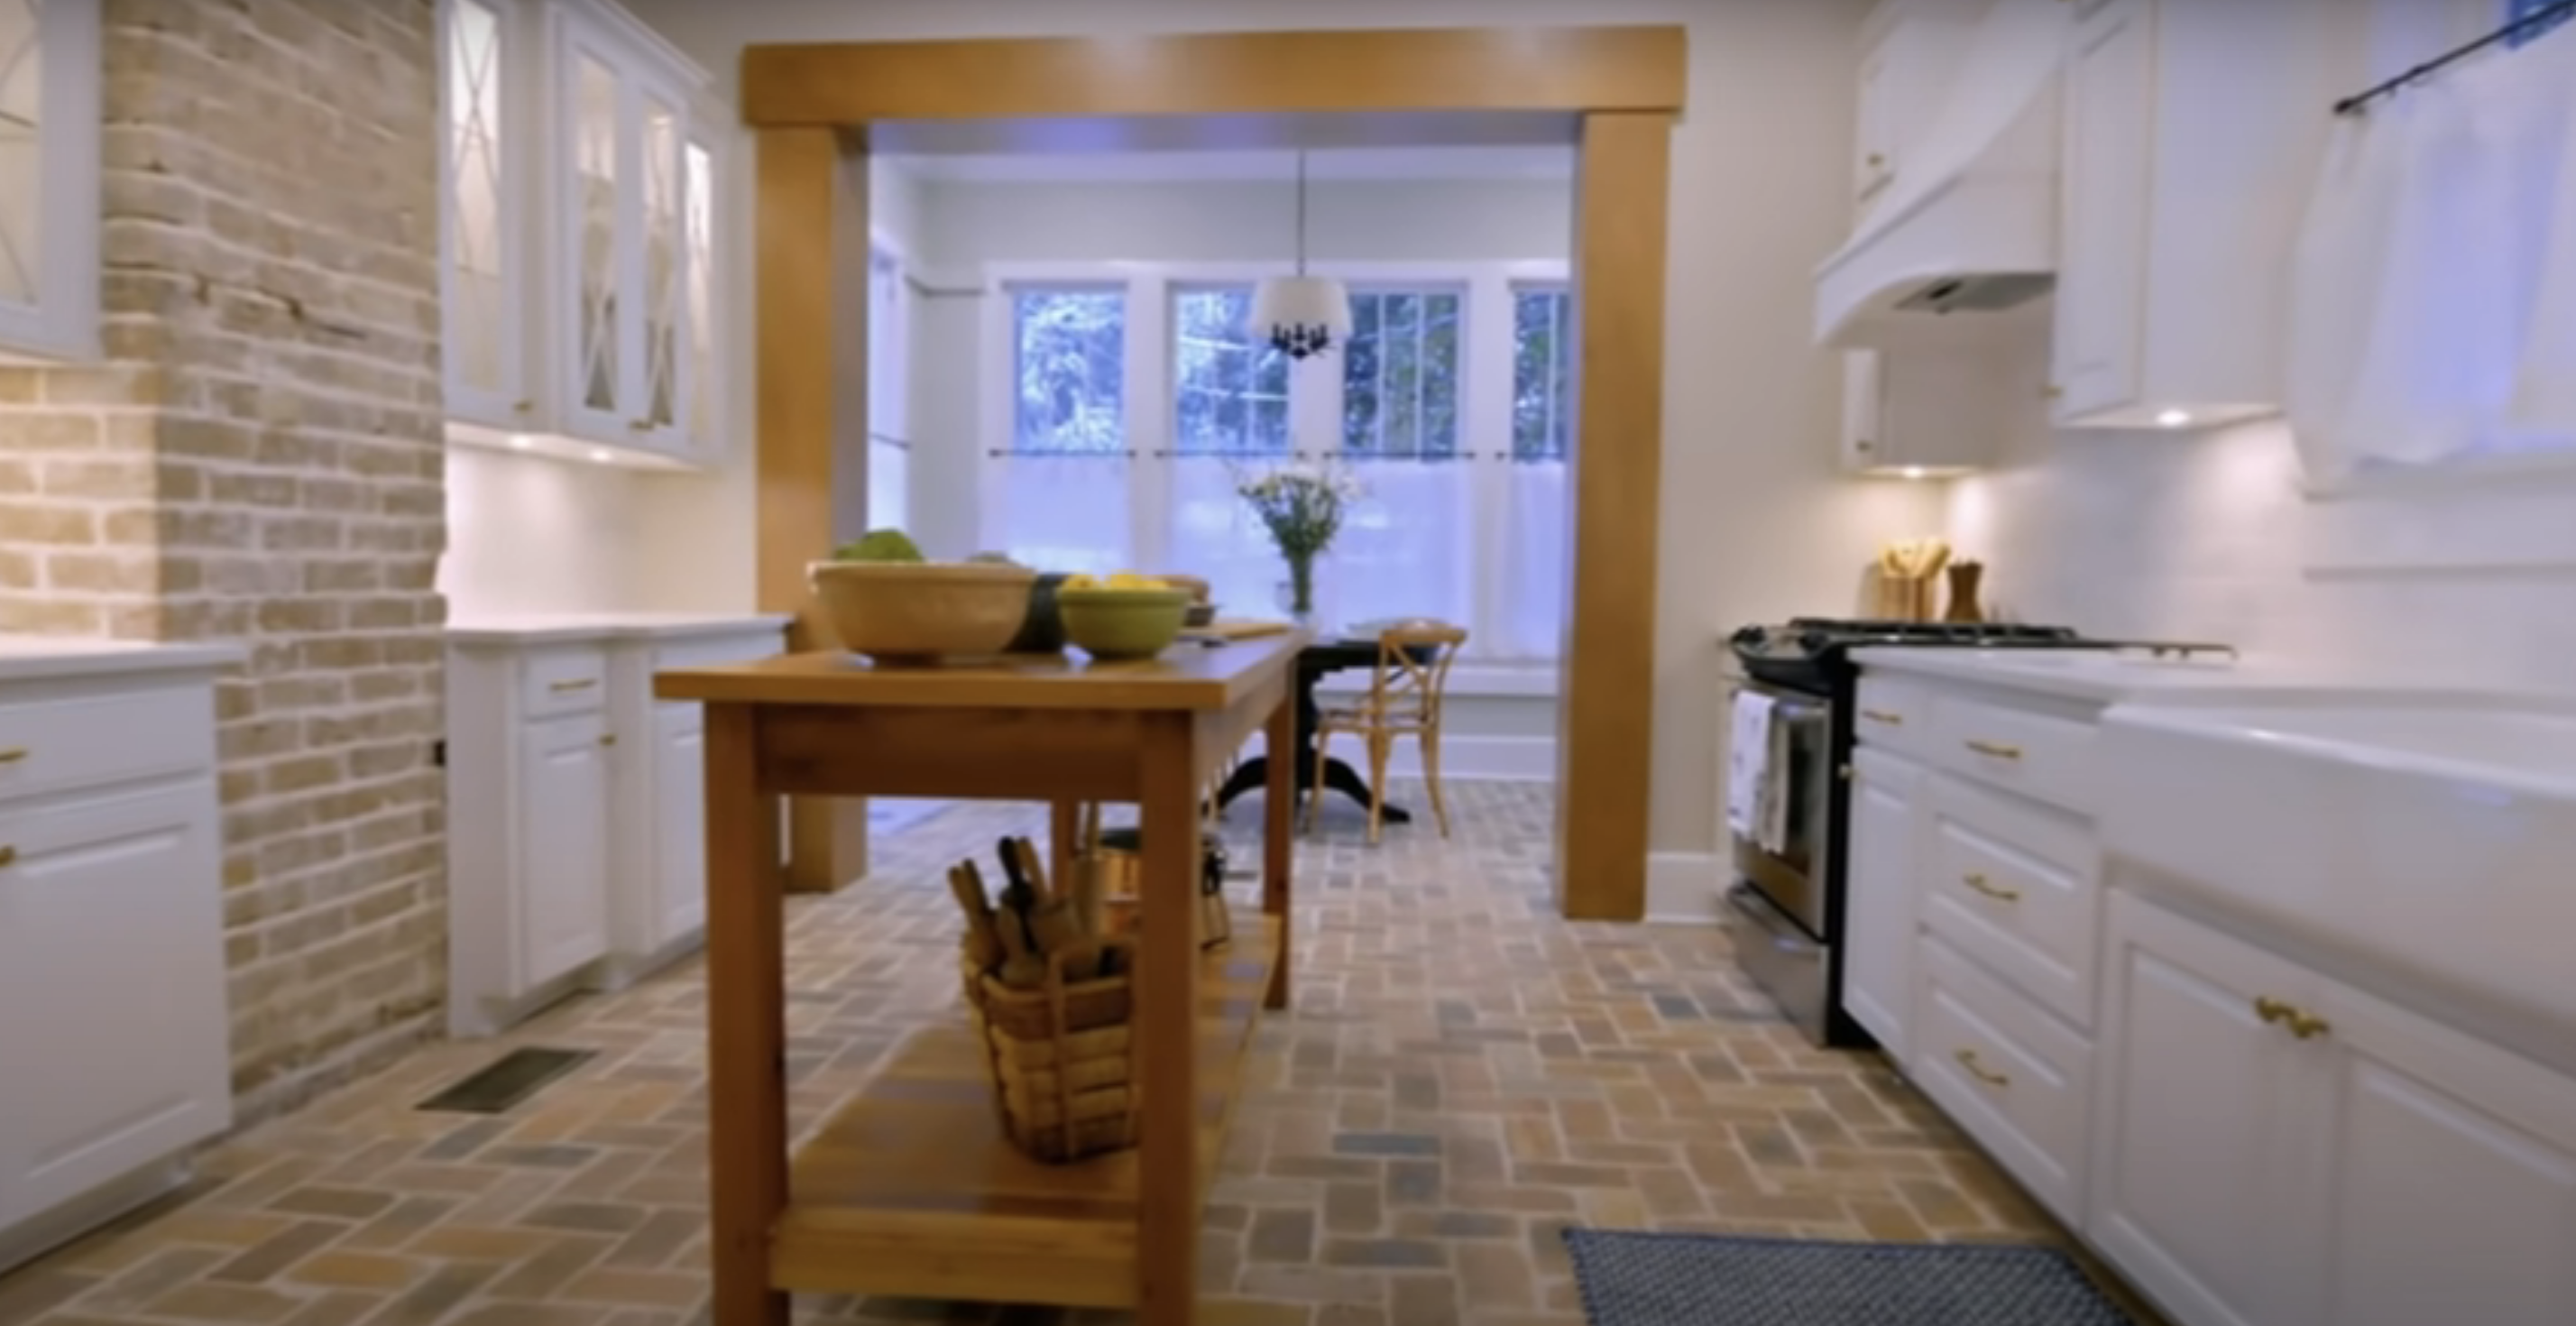 A kitchen designed by Erin and Ben, including a brick floor and a rustic wood island